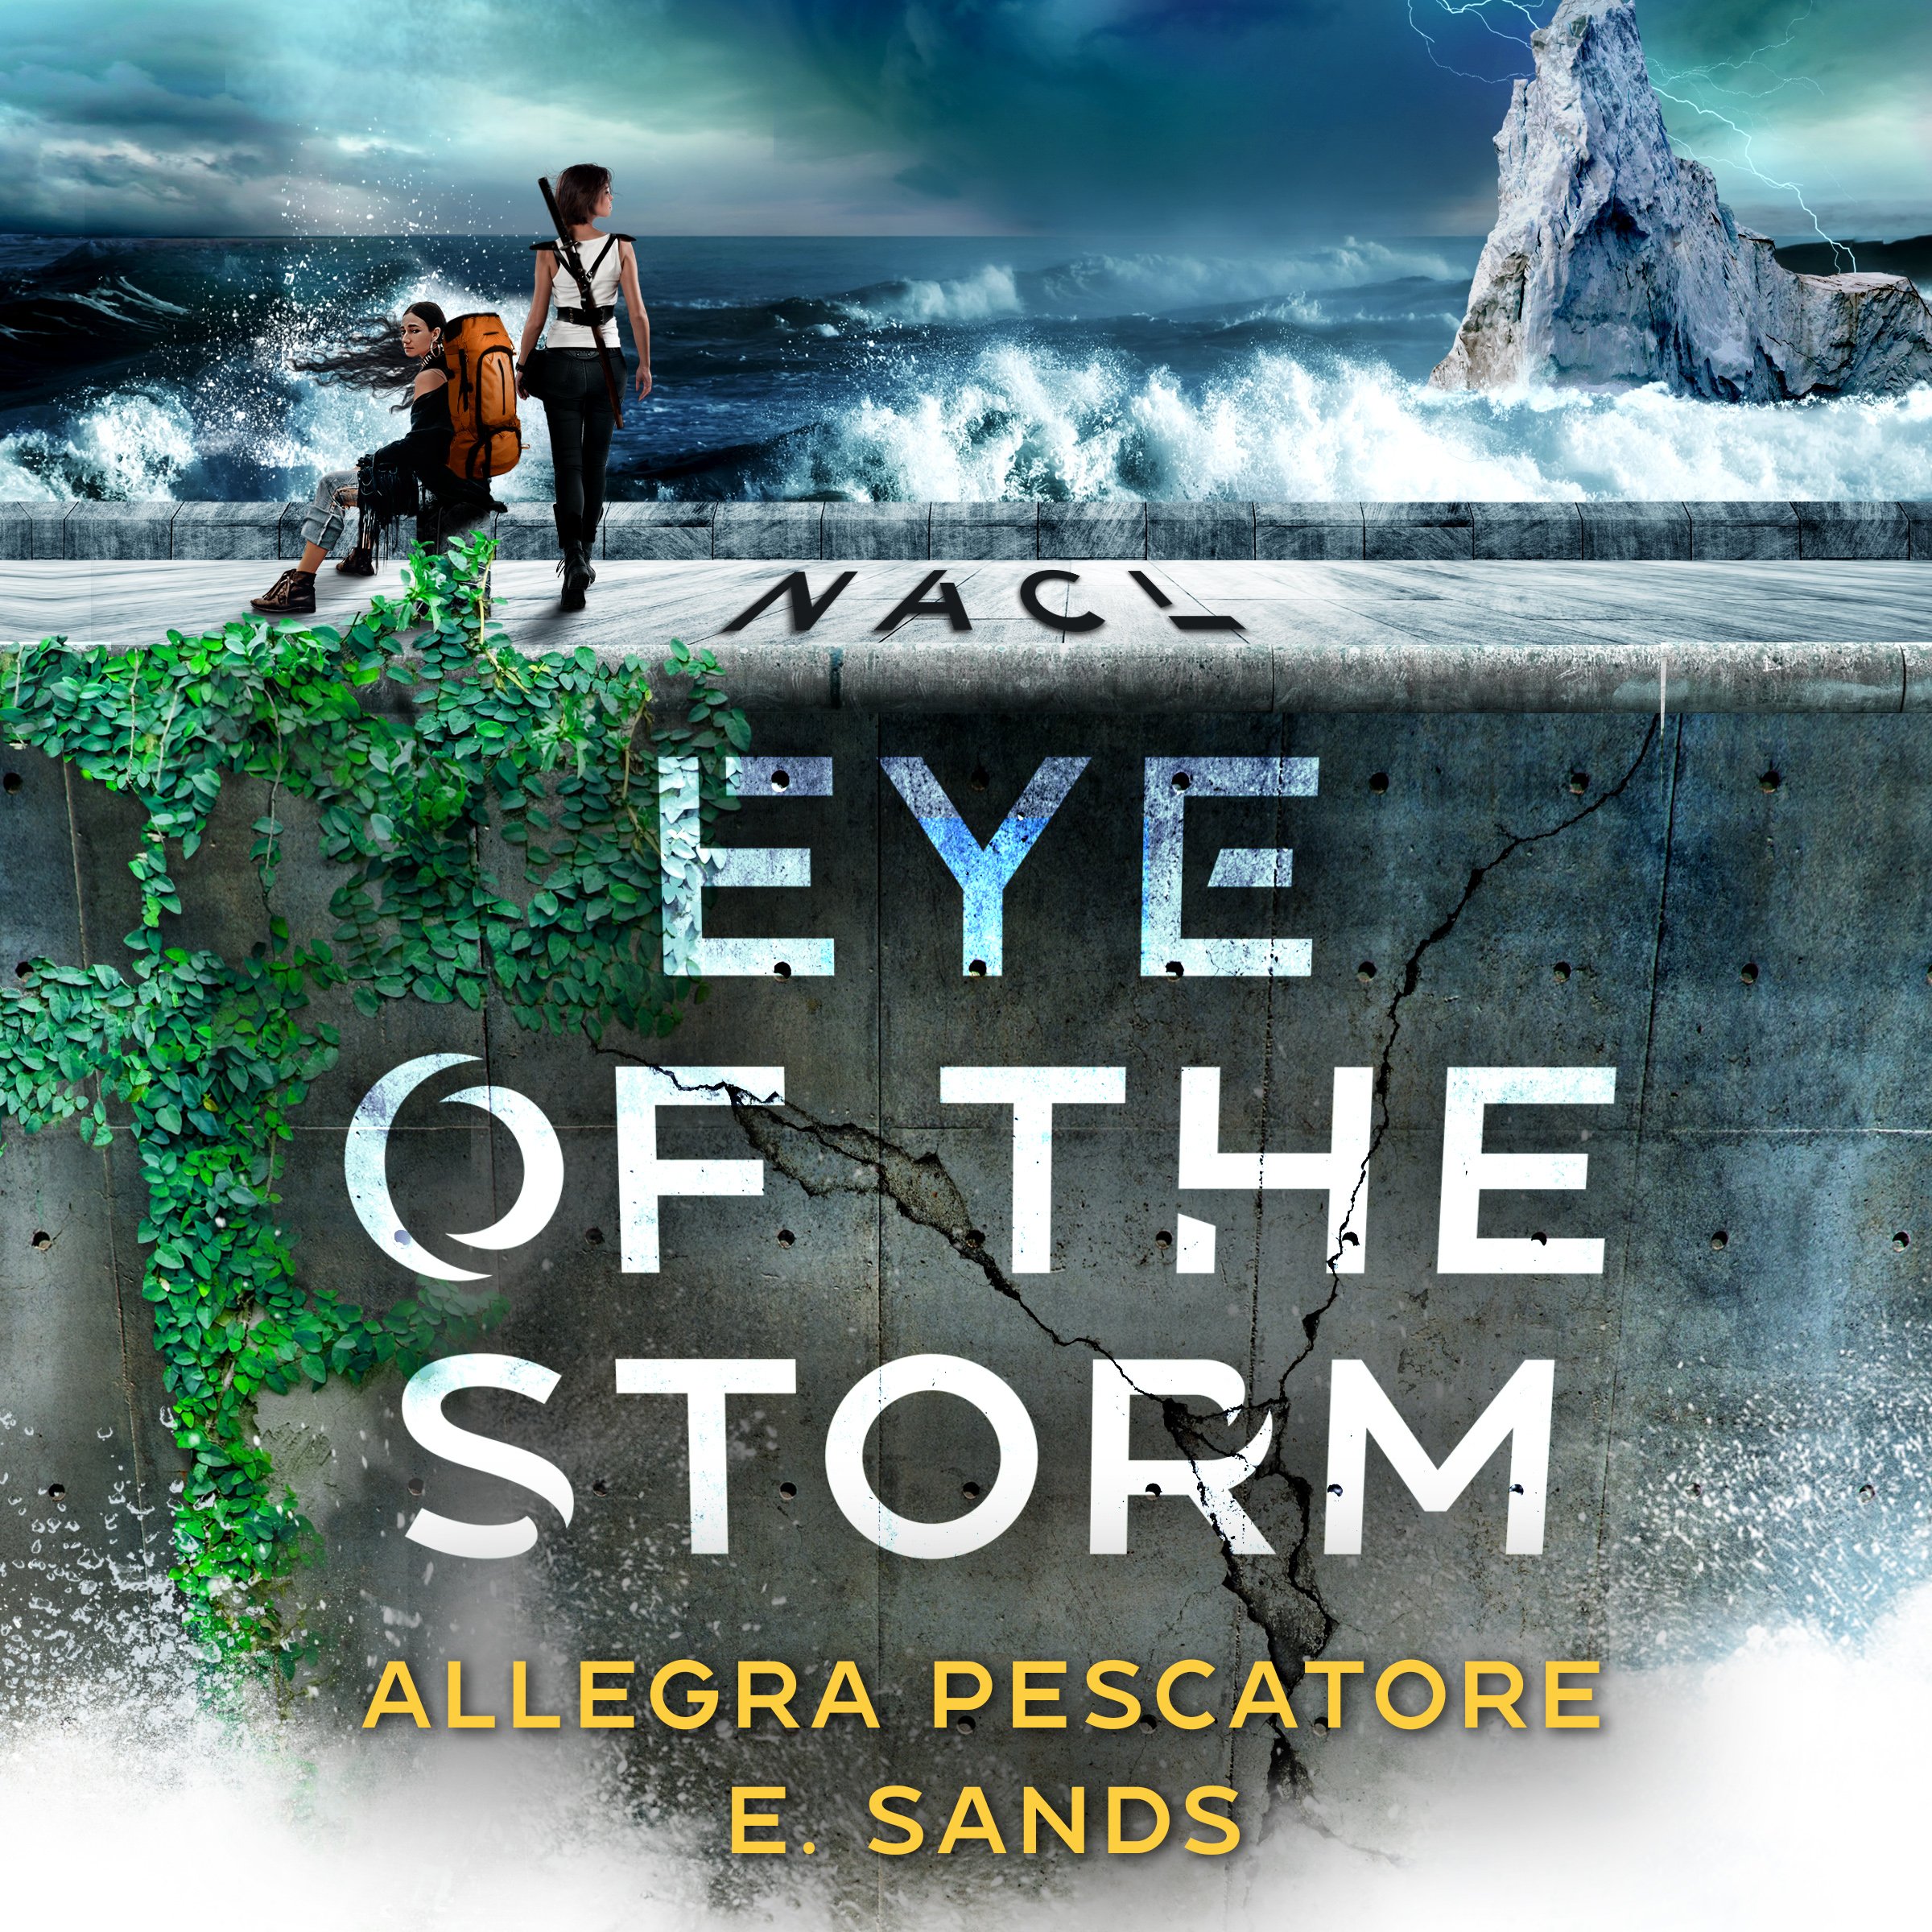 Audiobook Cover_Allegra Pescatore : E Sands_NACL Eye of the Storm.jpg